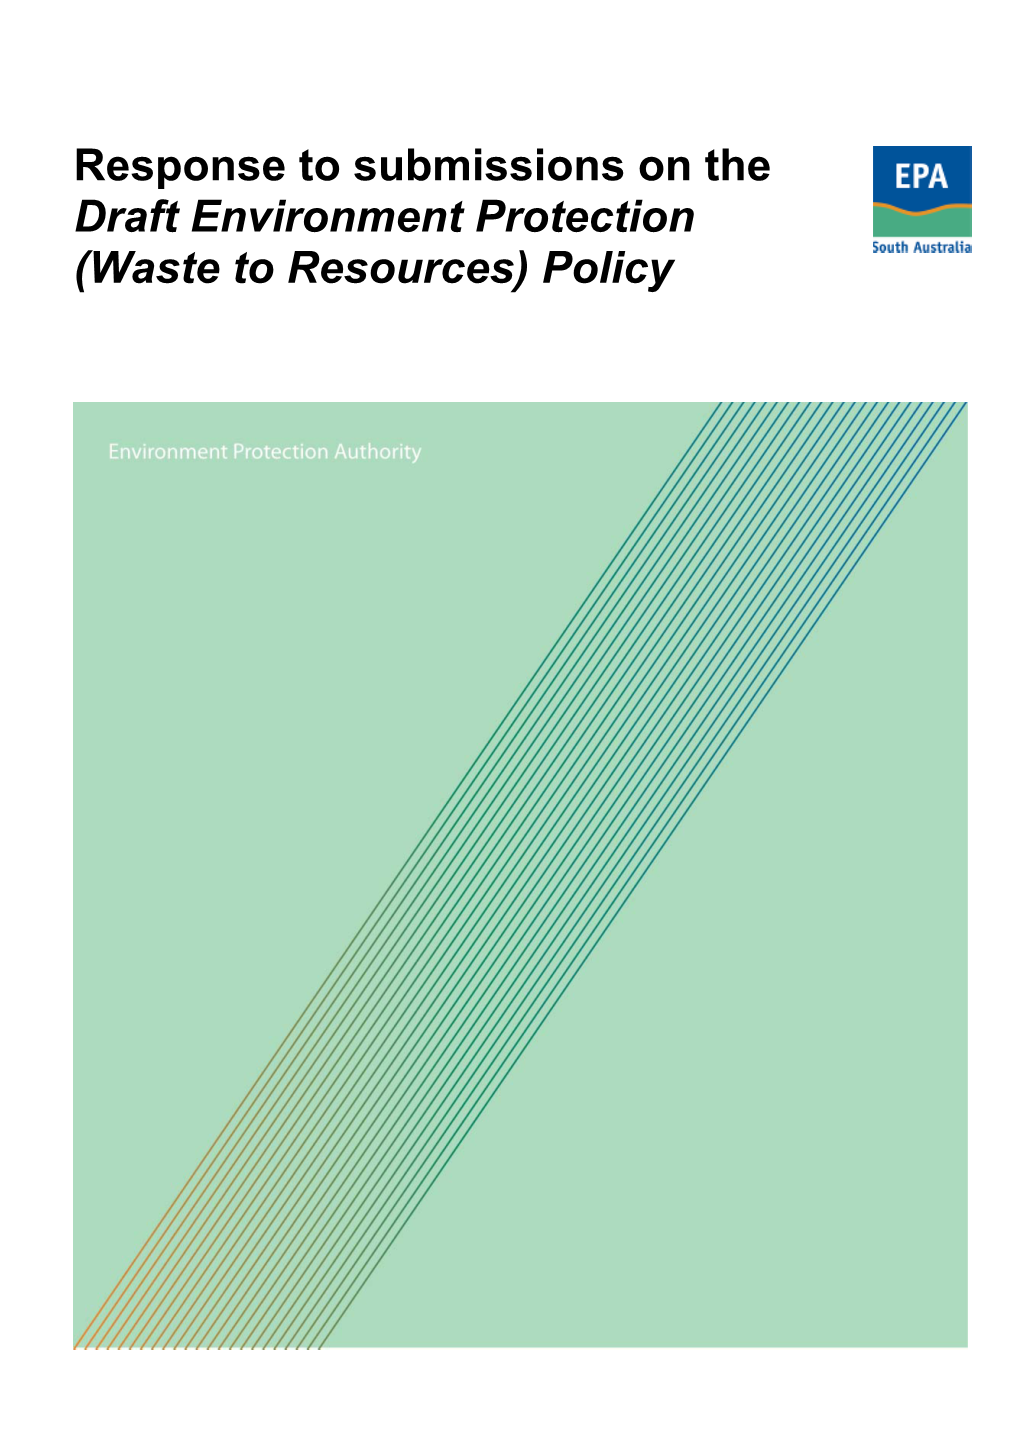 Response to Submissions on the Draft Environment Protection (Waste to Resources) Policy